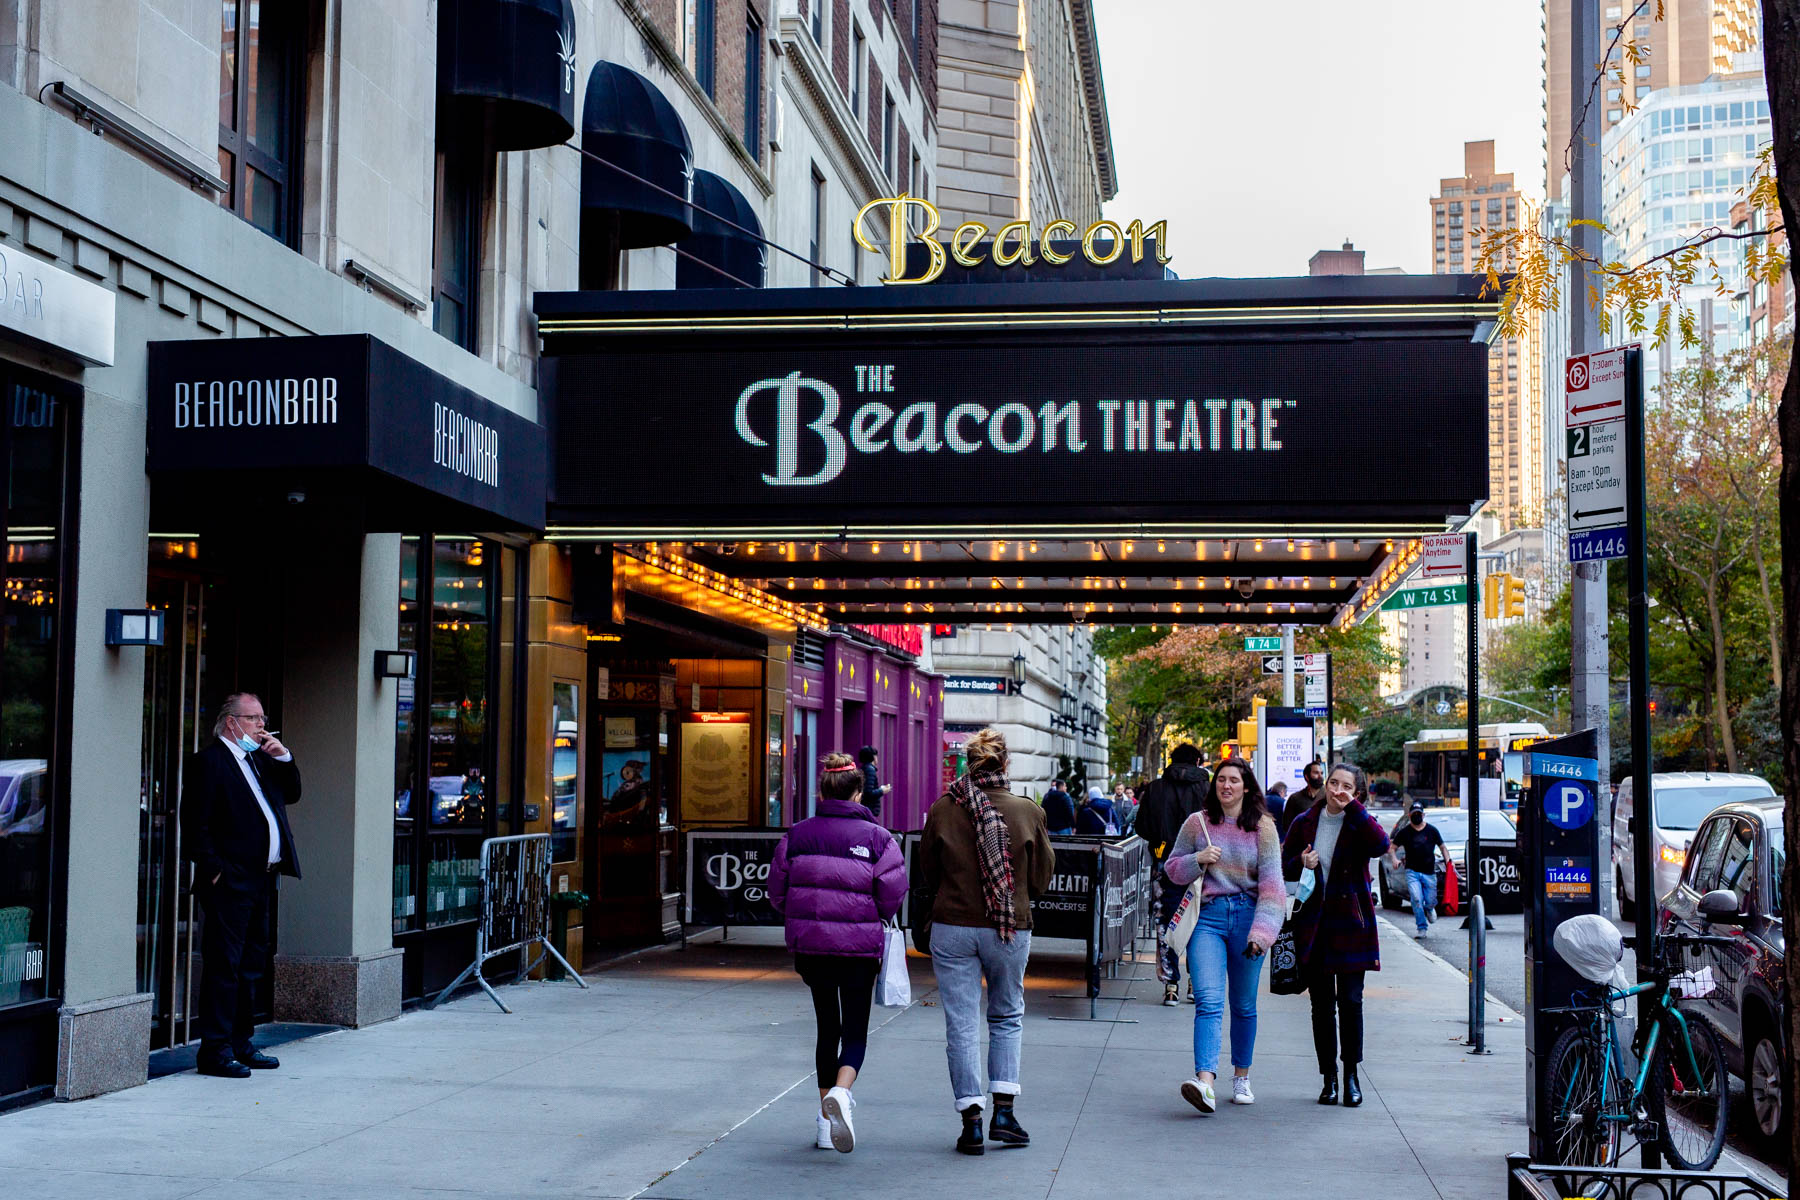 Beacon Theater Upper West Side
UWS Best things to do